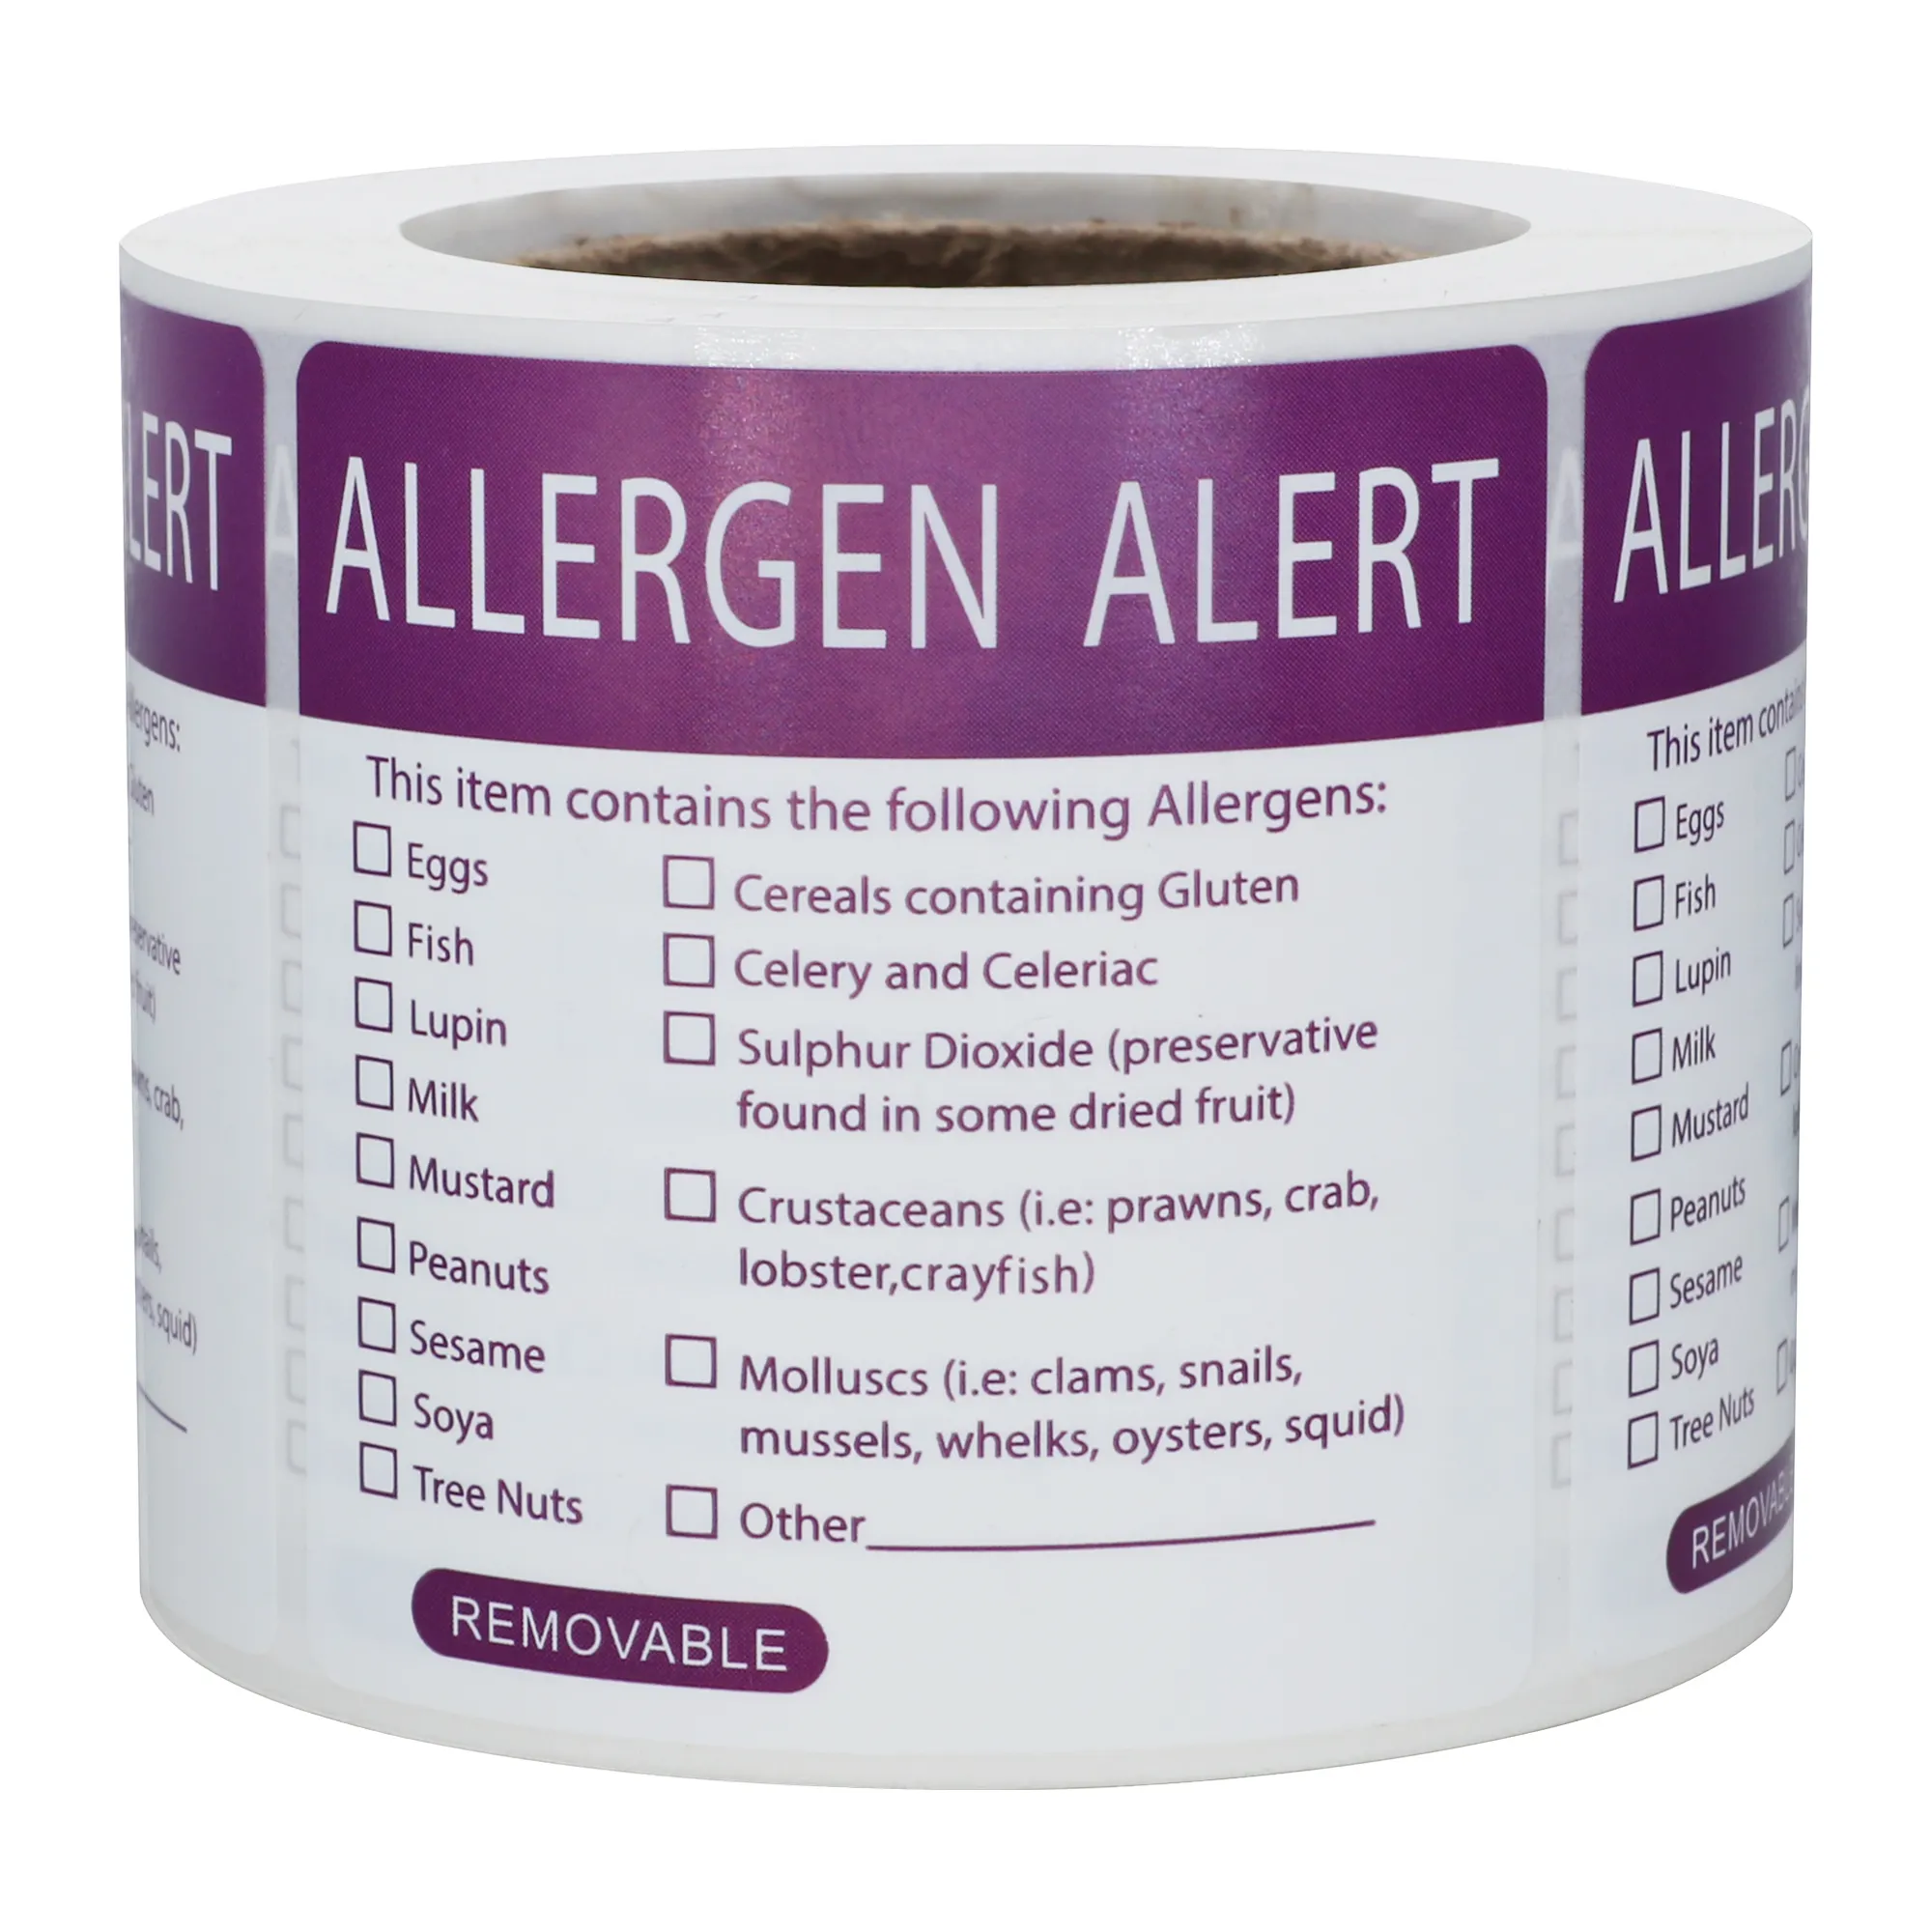 Hybsk Allergen Warning Stickers 2x2 inch 300pcs Square Removable Food Allergy Label for Restaurants